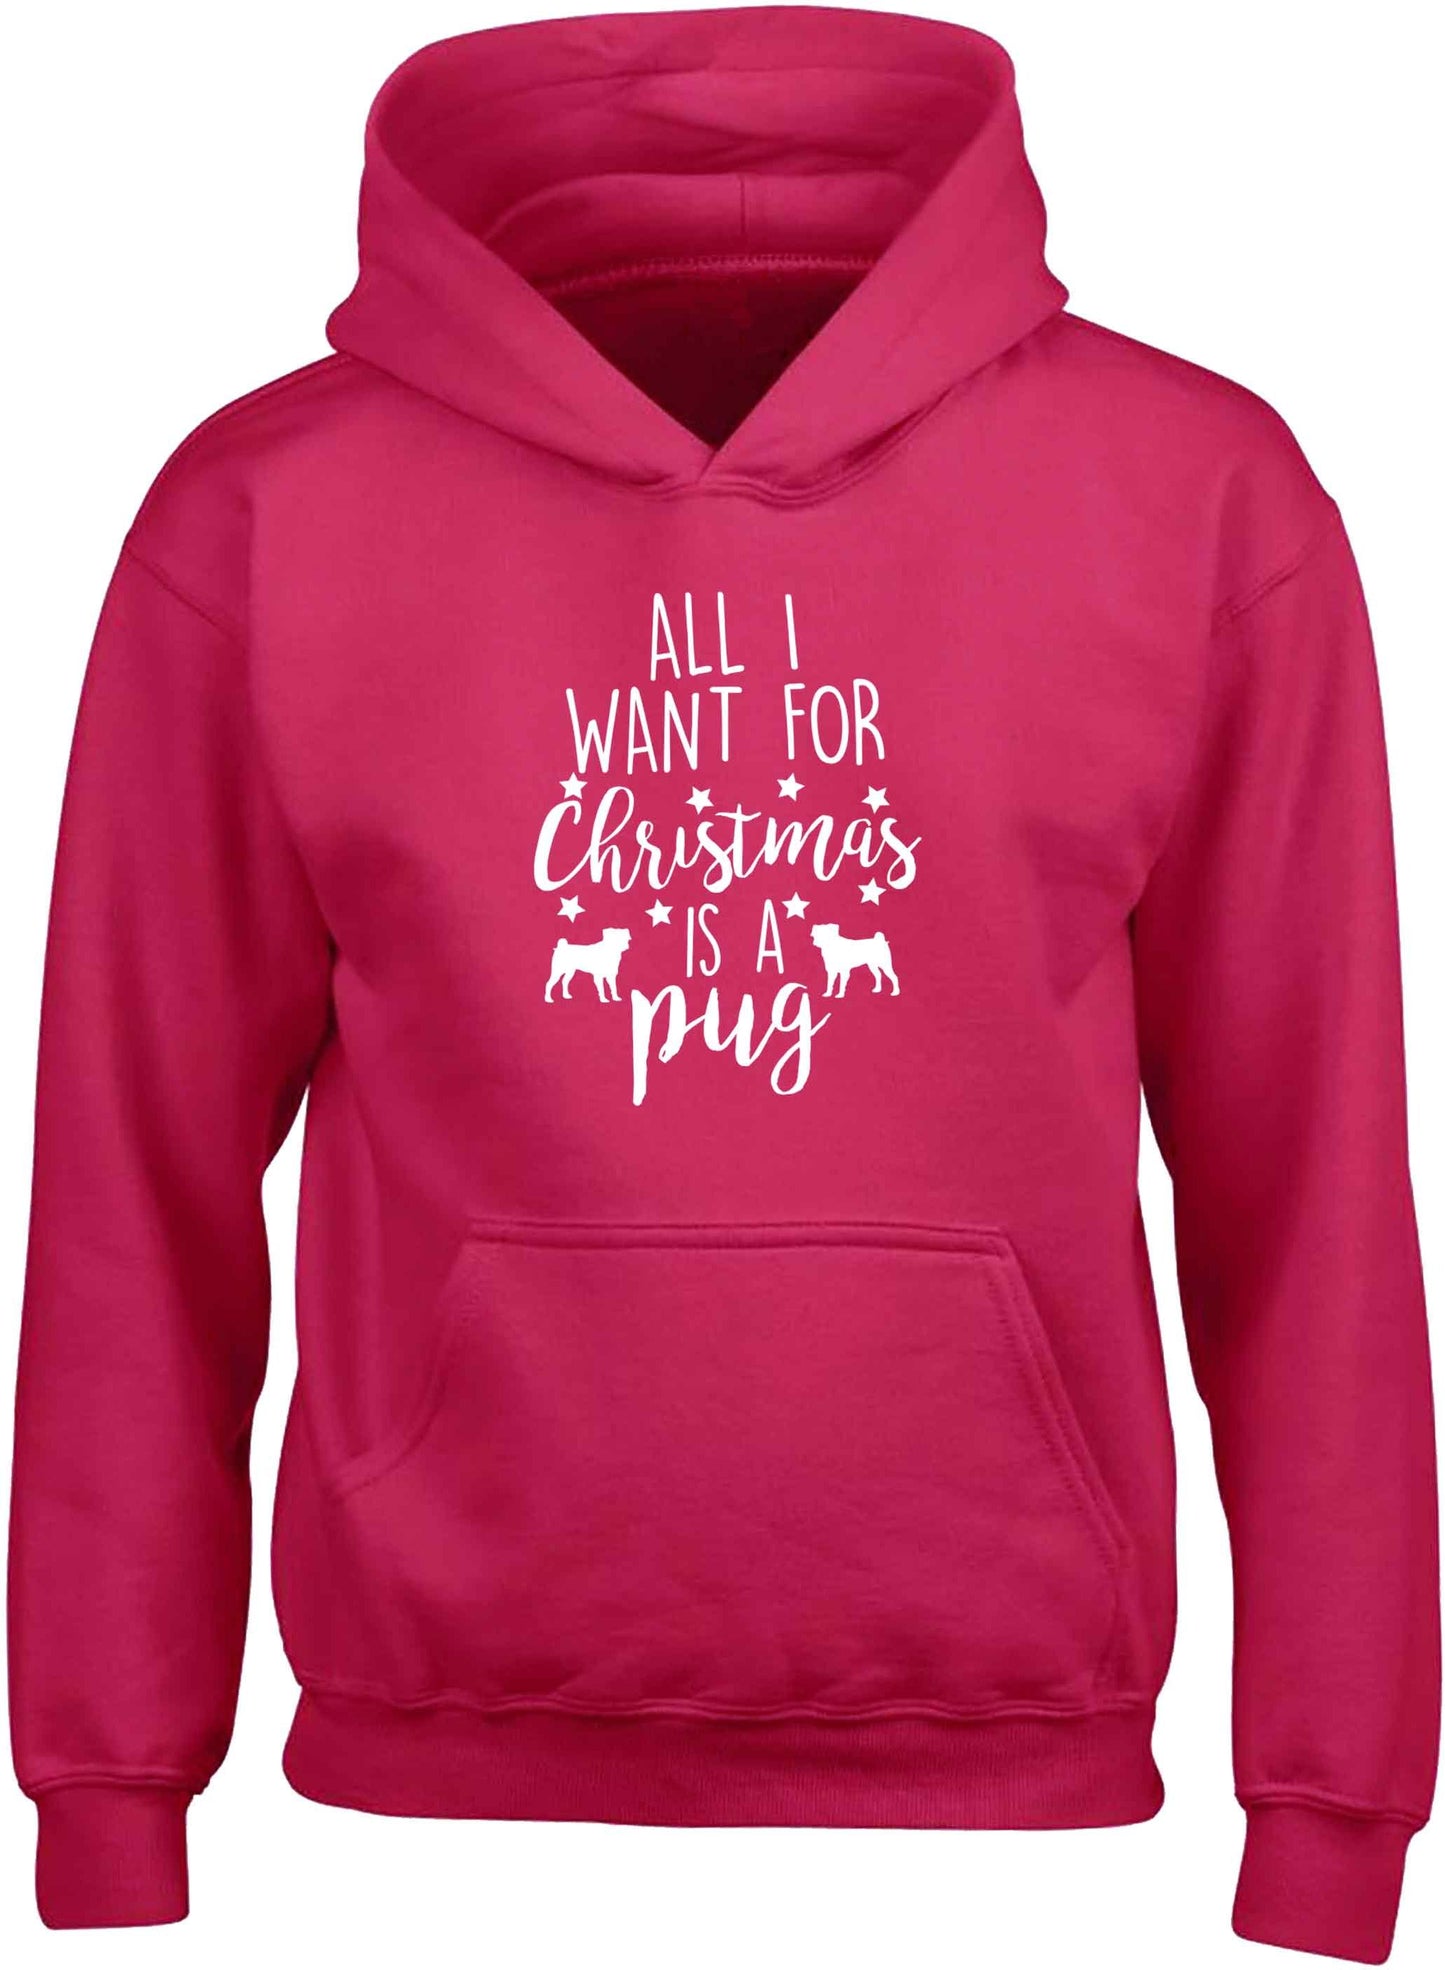 All I want for Christmas is a pug children's pink hoodie 12-13 Years